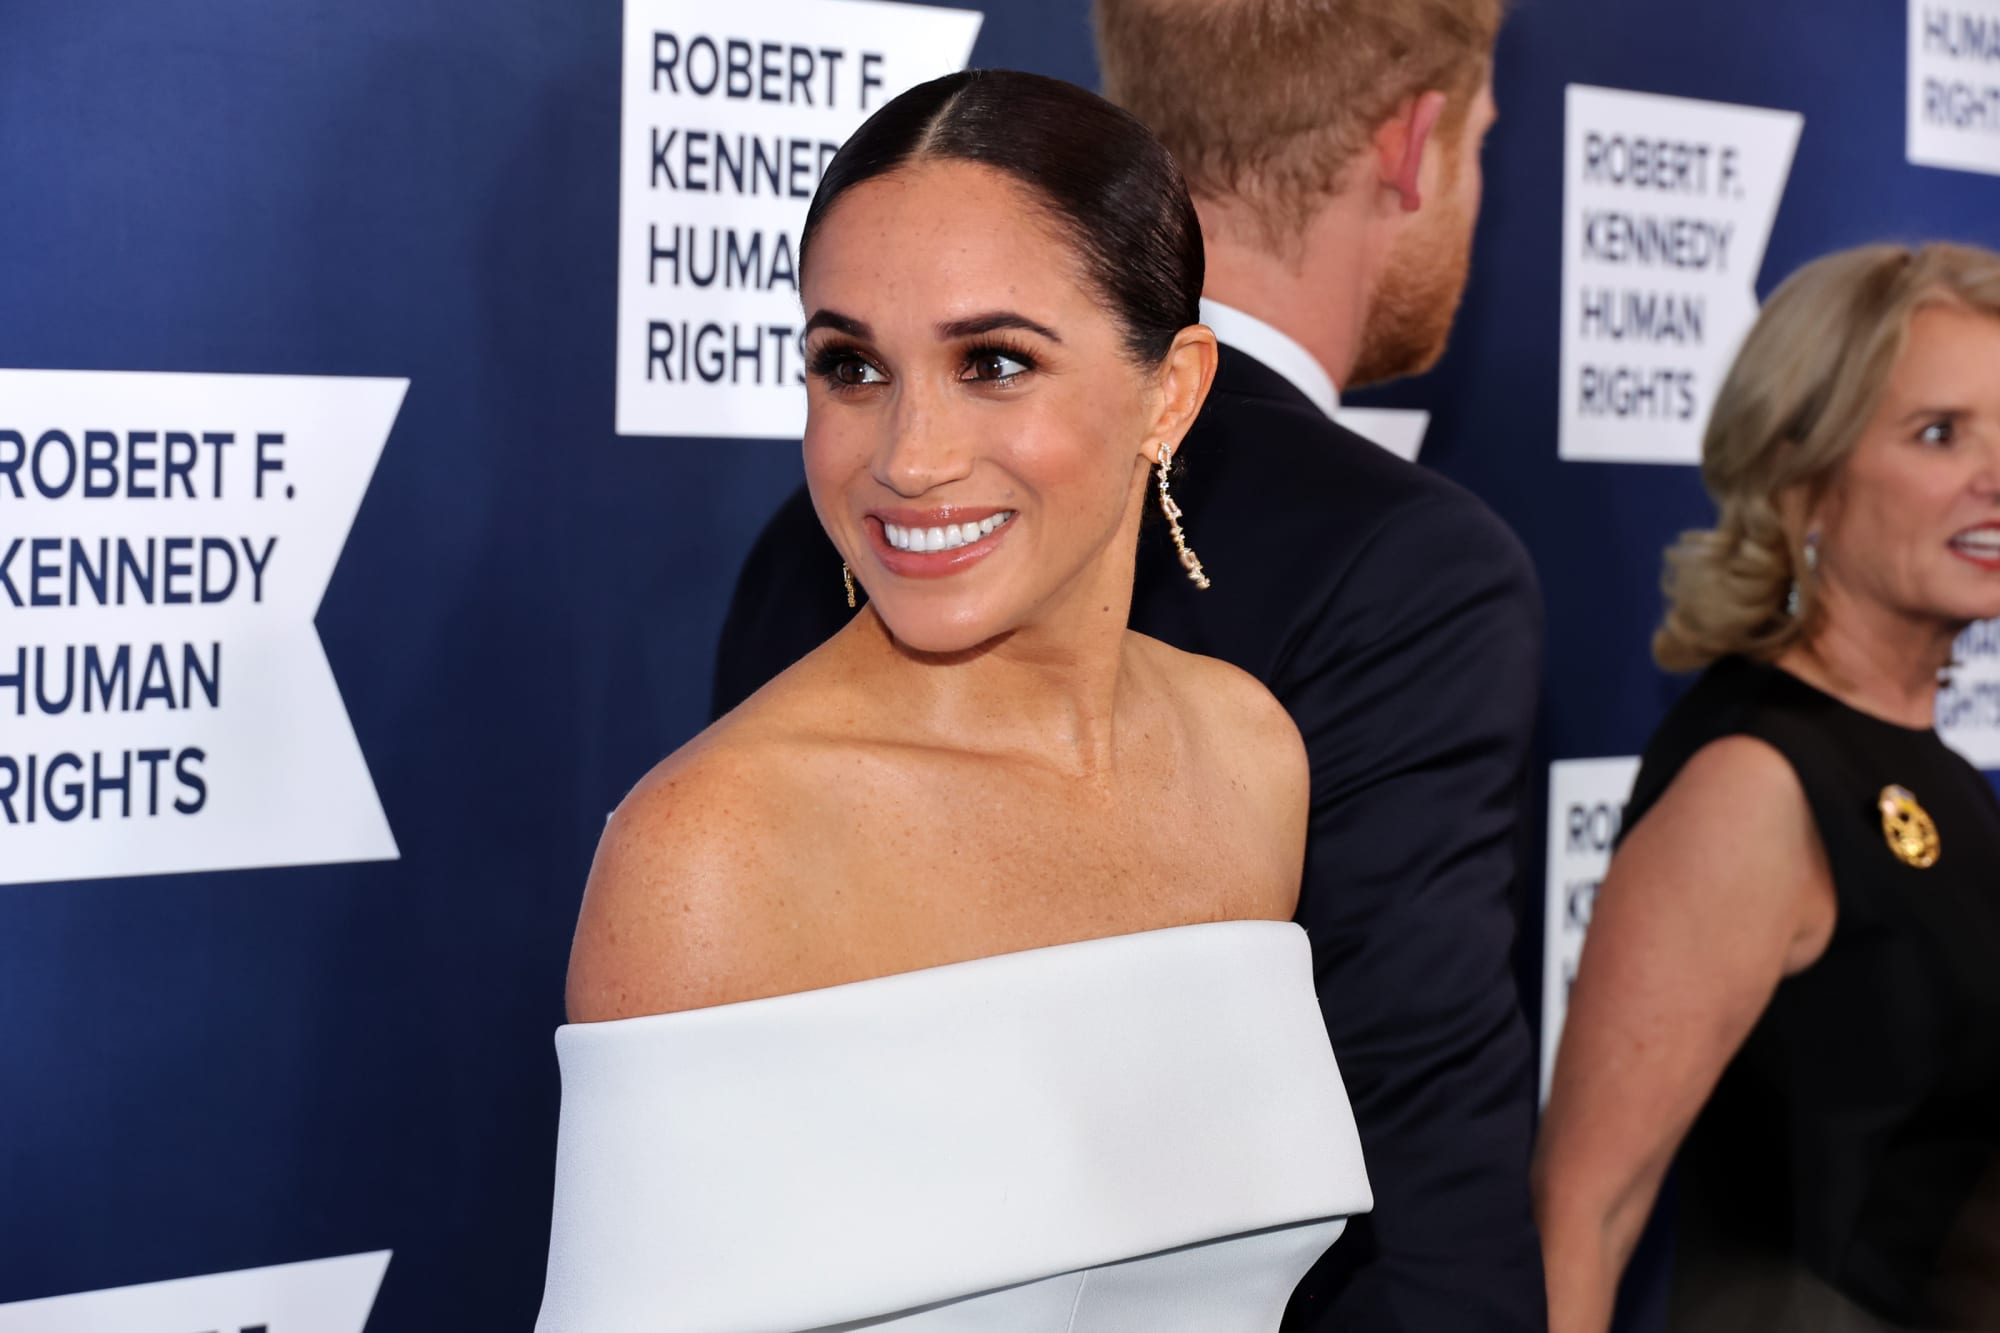 How many times has Meghan Markle been married?

+2023